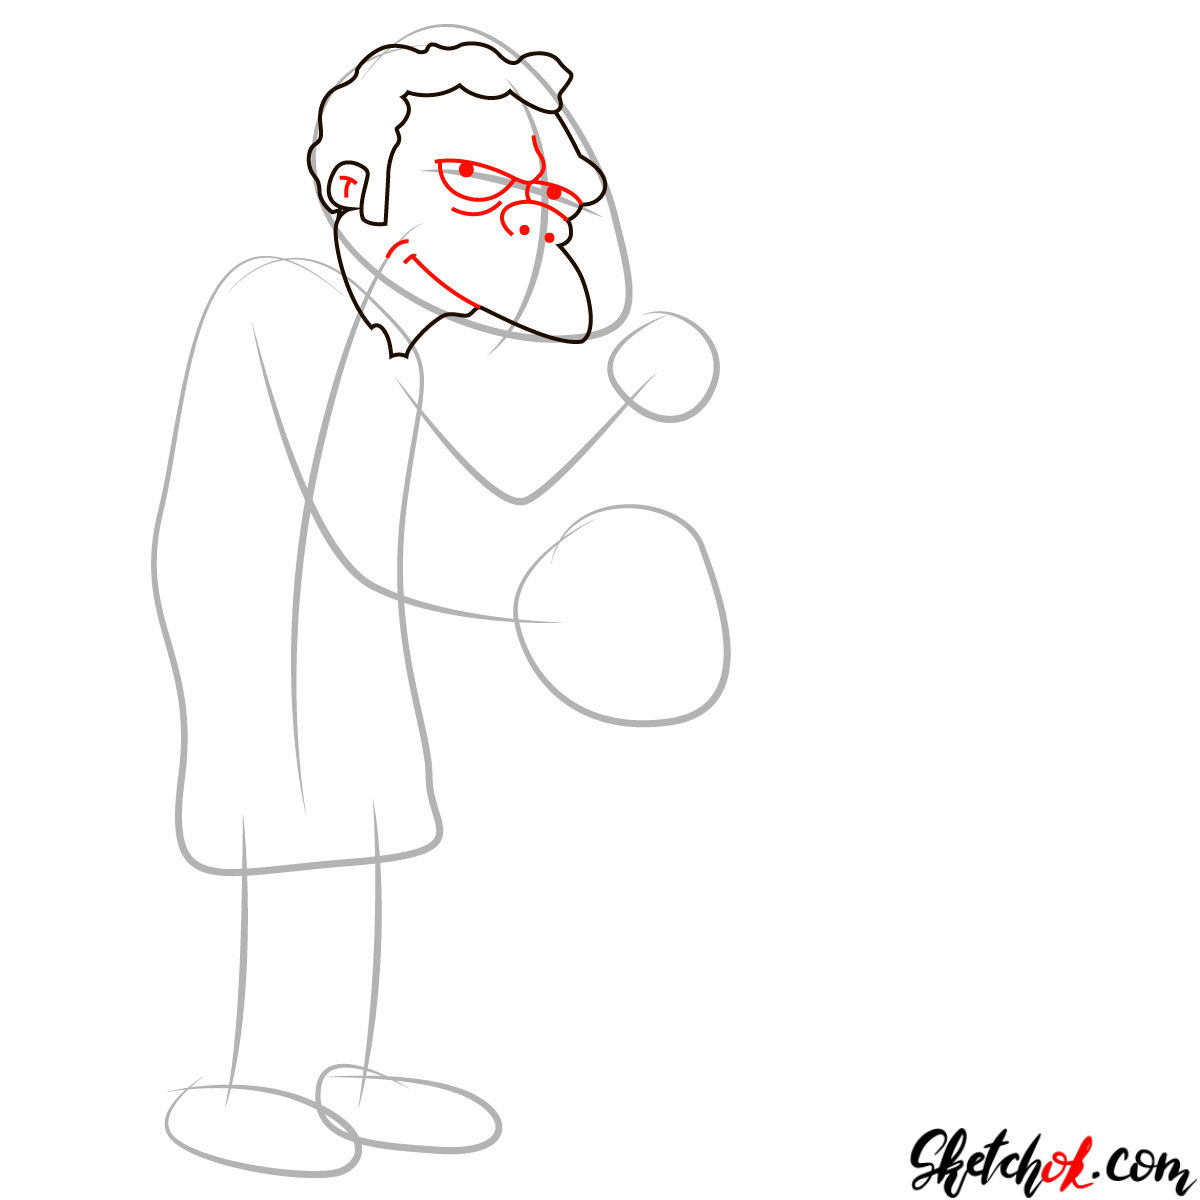 How to draw Moe Szyslak in his bar - step 03